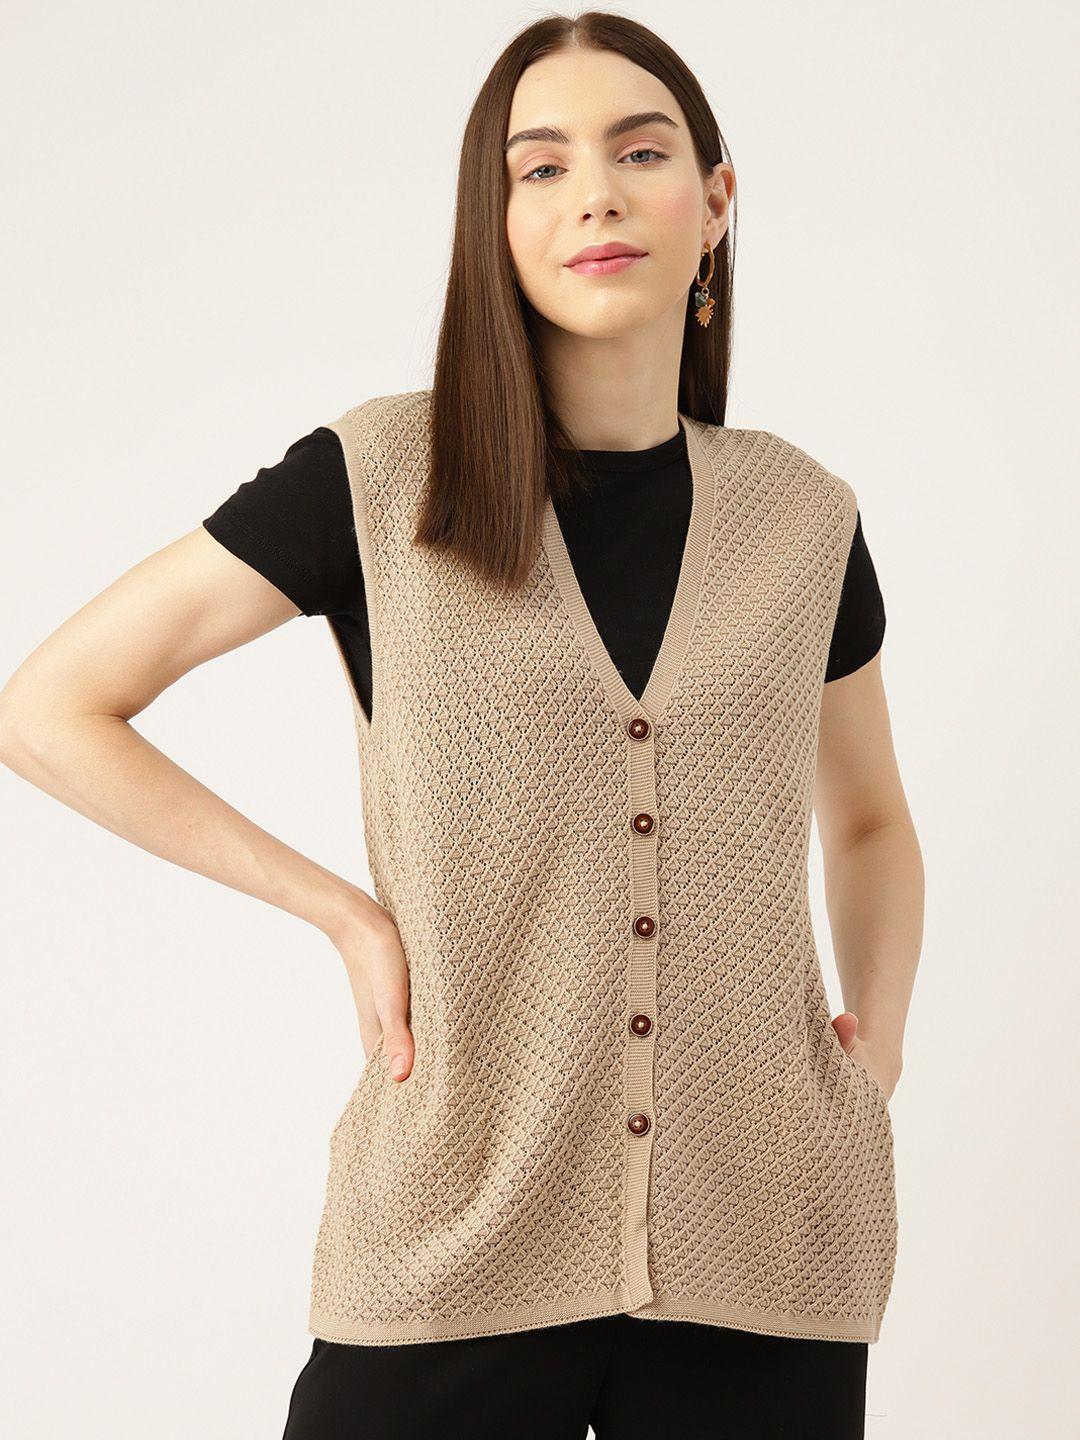 apsley-women-self-design-cardigan-with-embroidered-detail